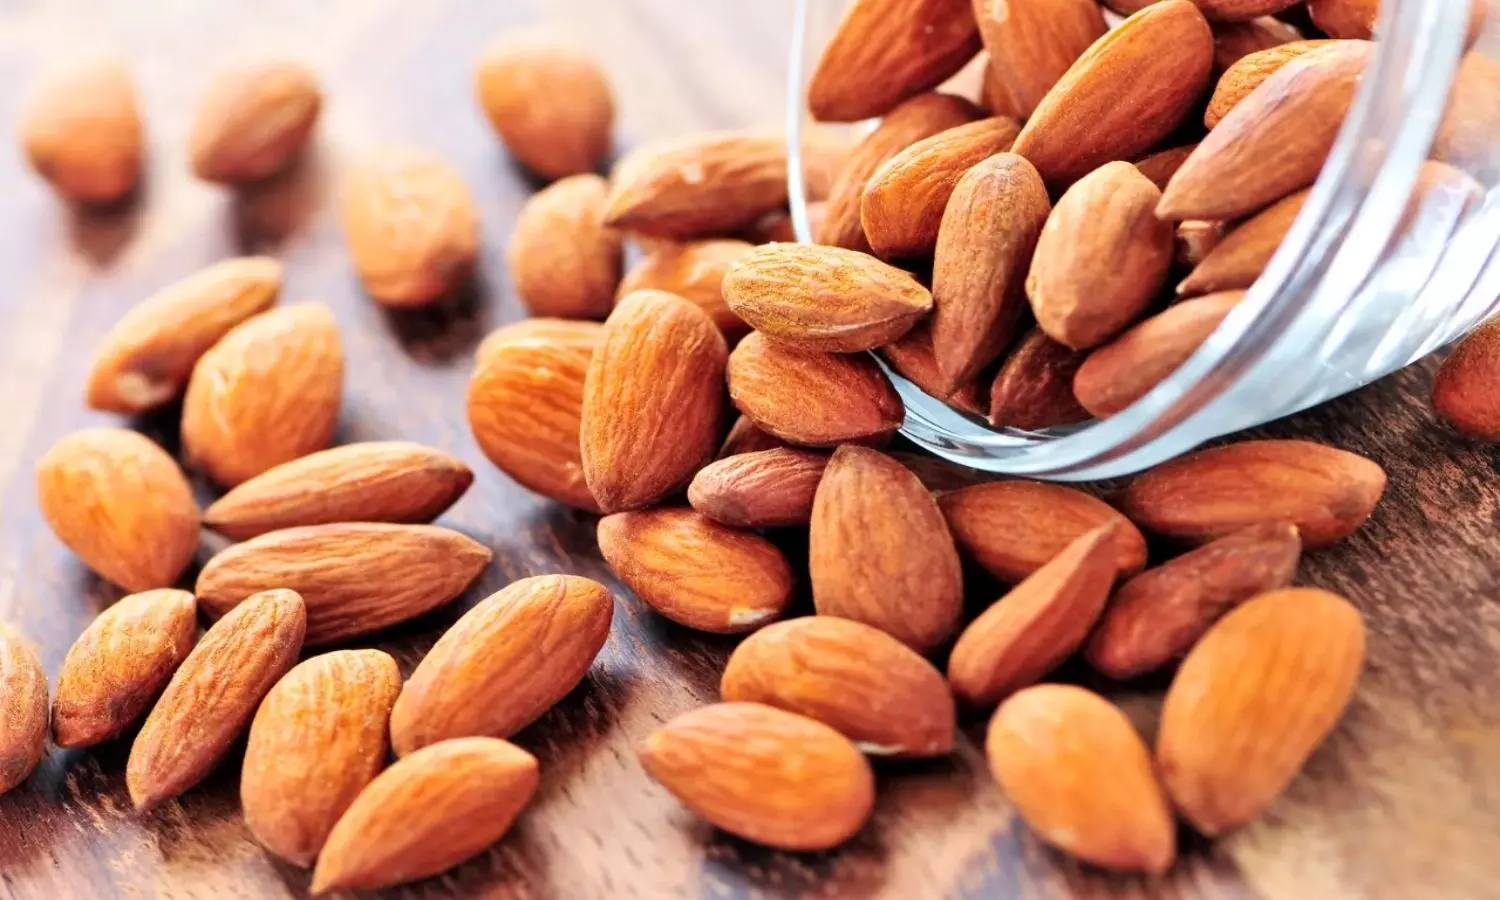 These are the side effects with eating almonds without soaking in water